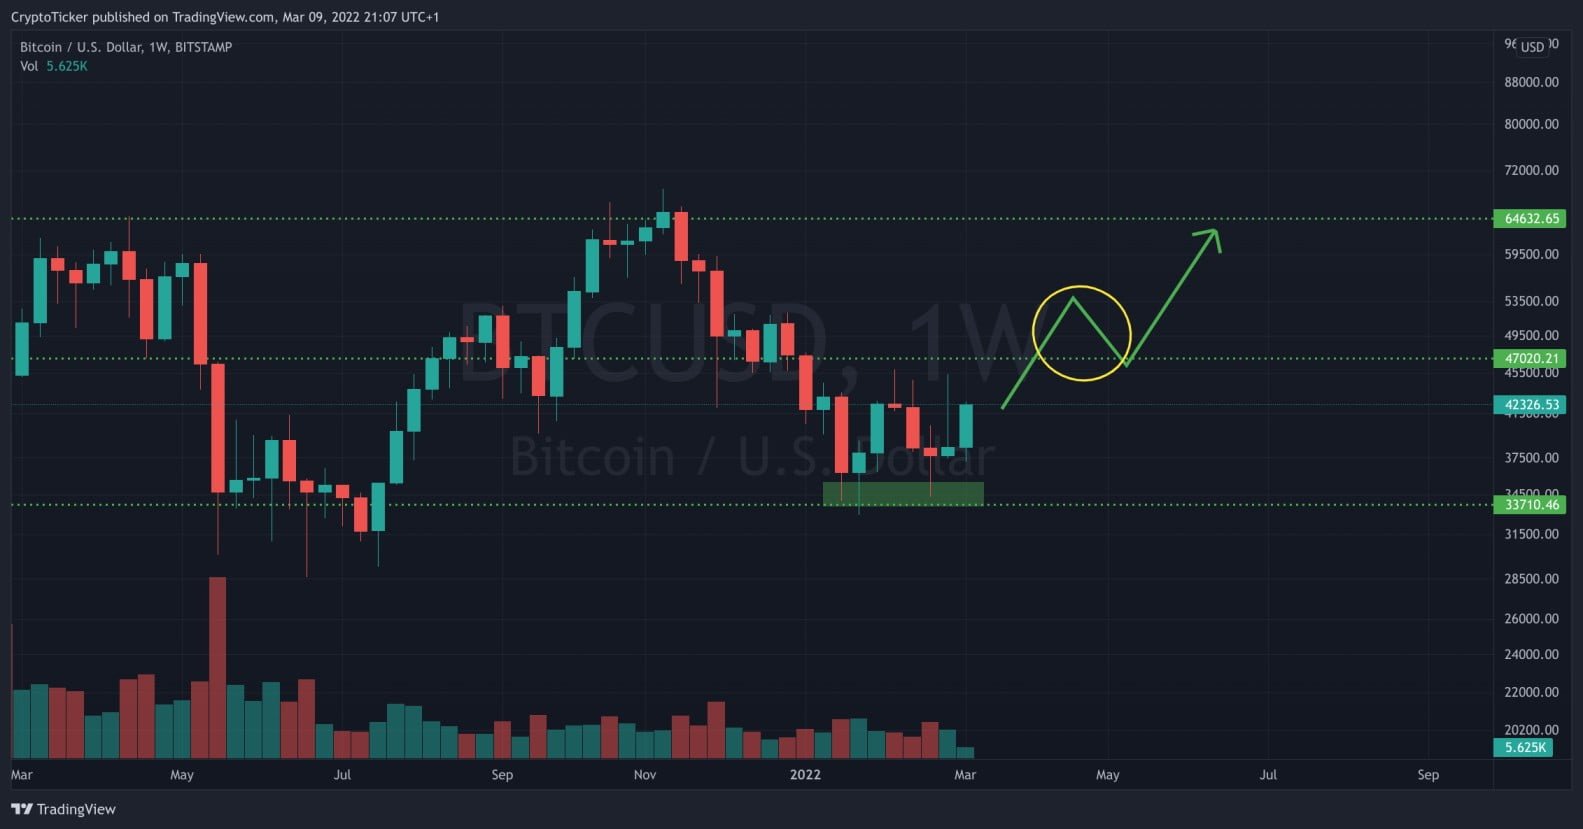 BTC/USD 1-week chart showing BTC up potential